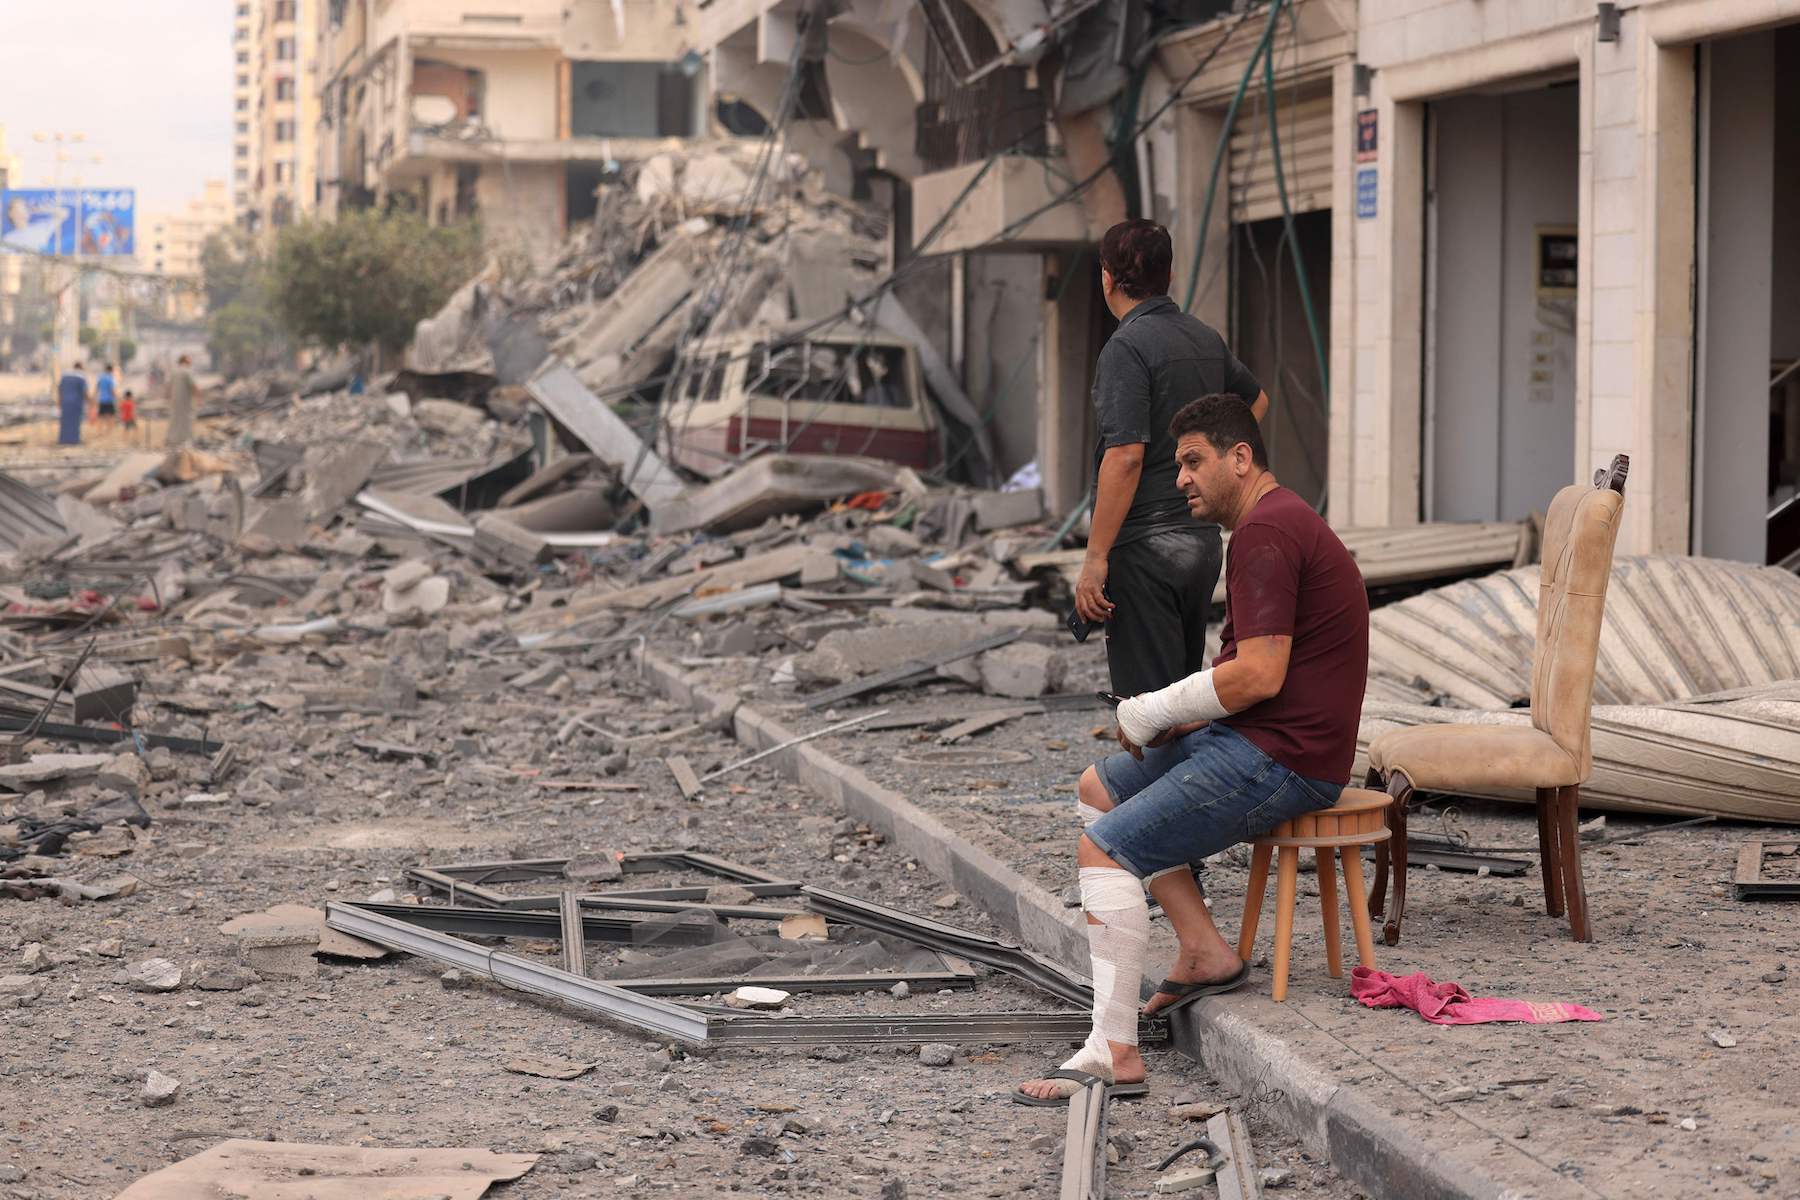 Palestinian men look at the destruction outside a damaged apartment building